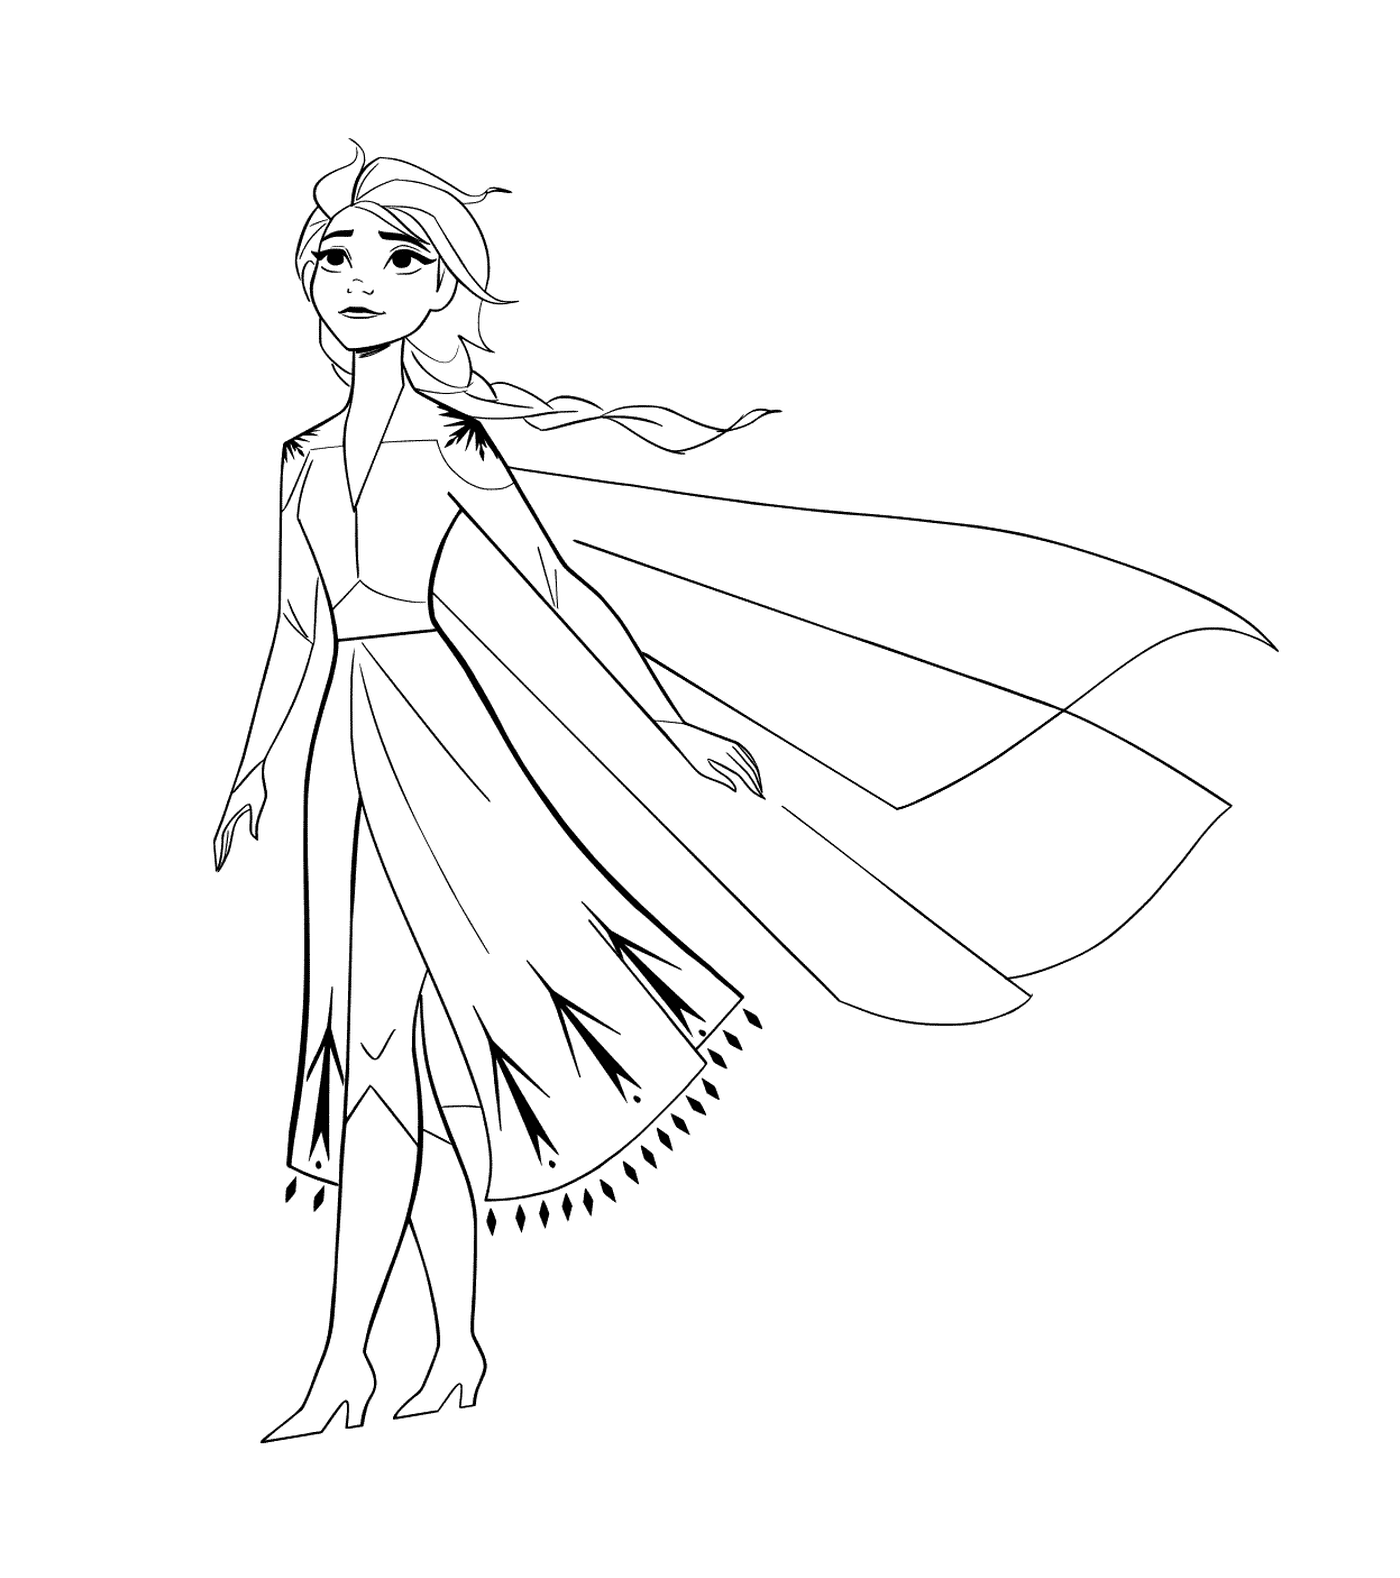  Elsa of the new movie The Snow Queen 2 to color 